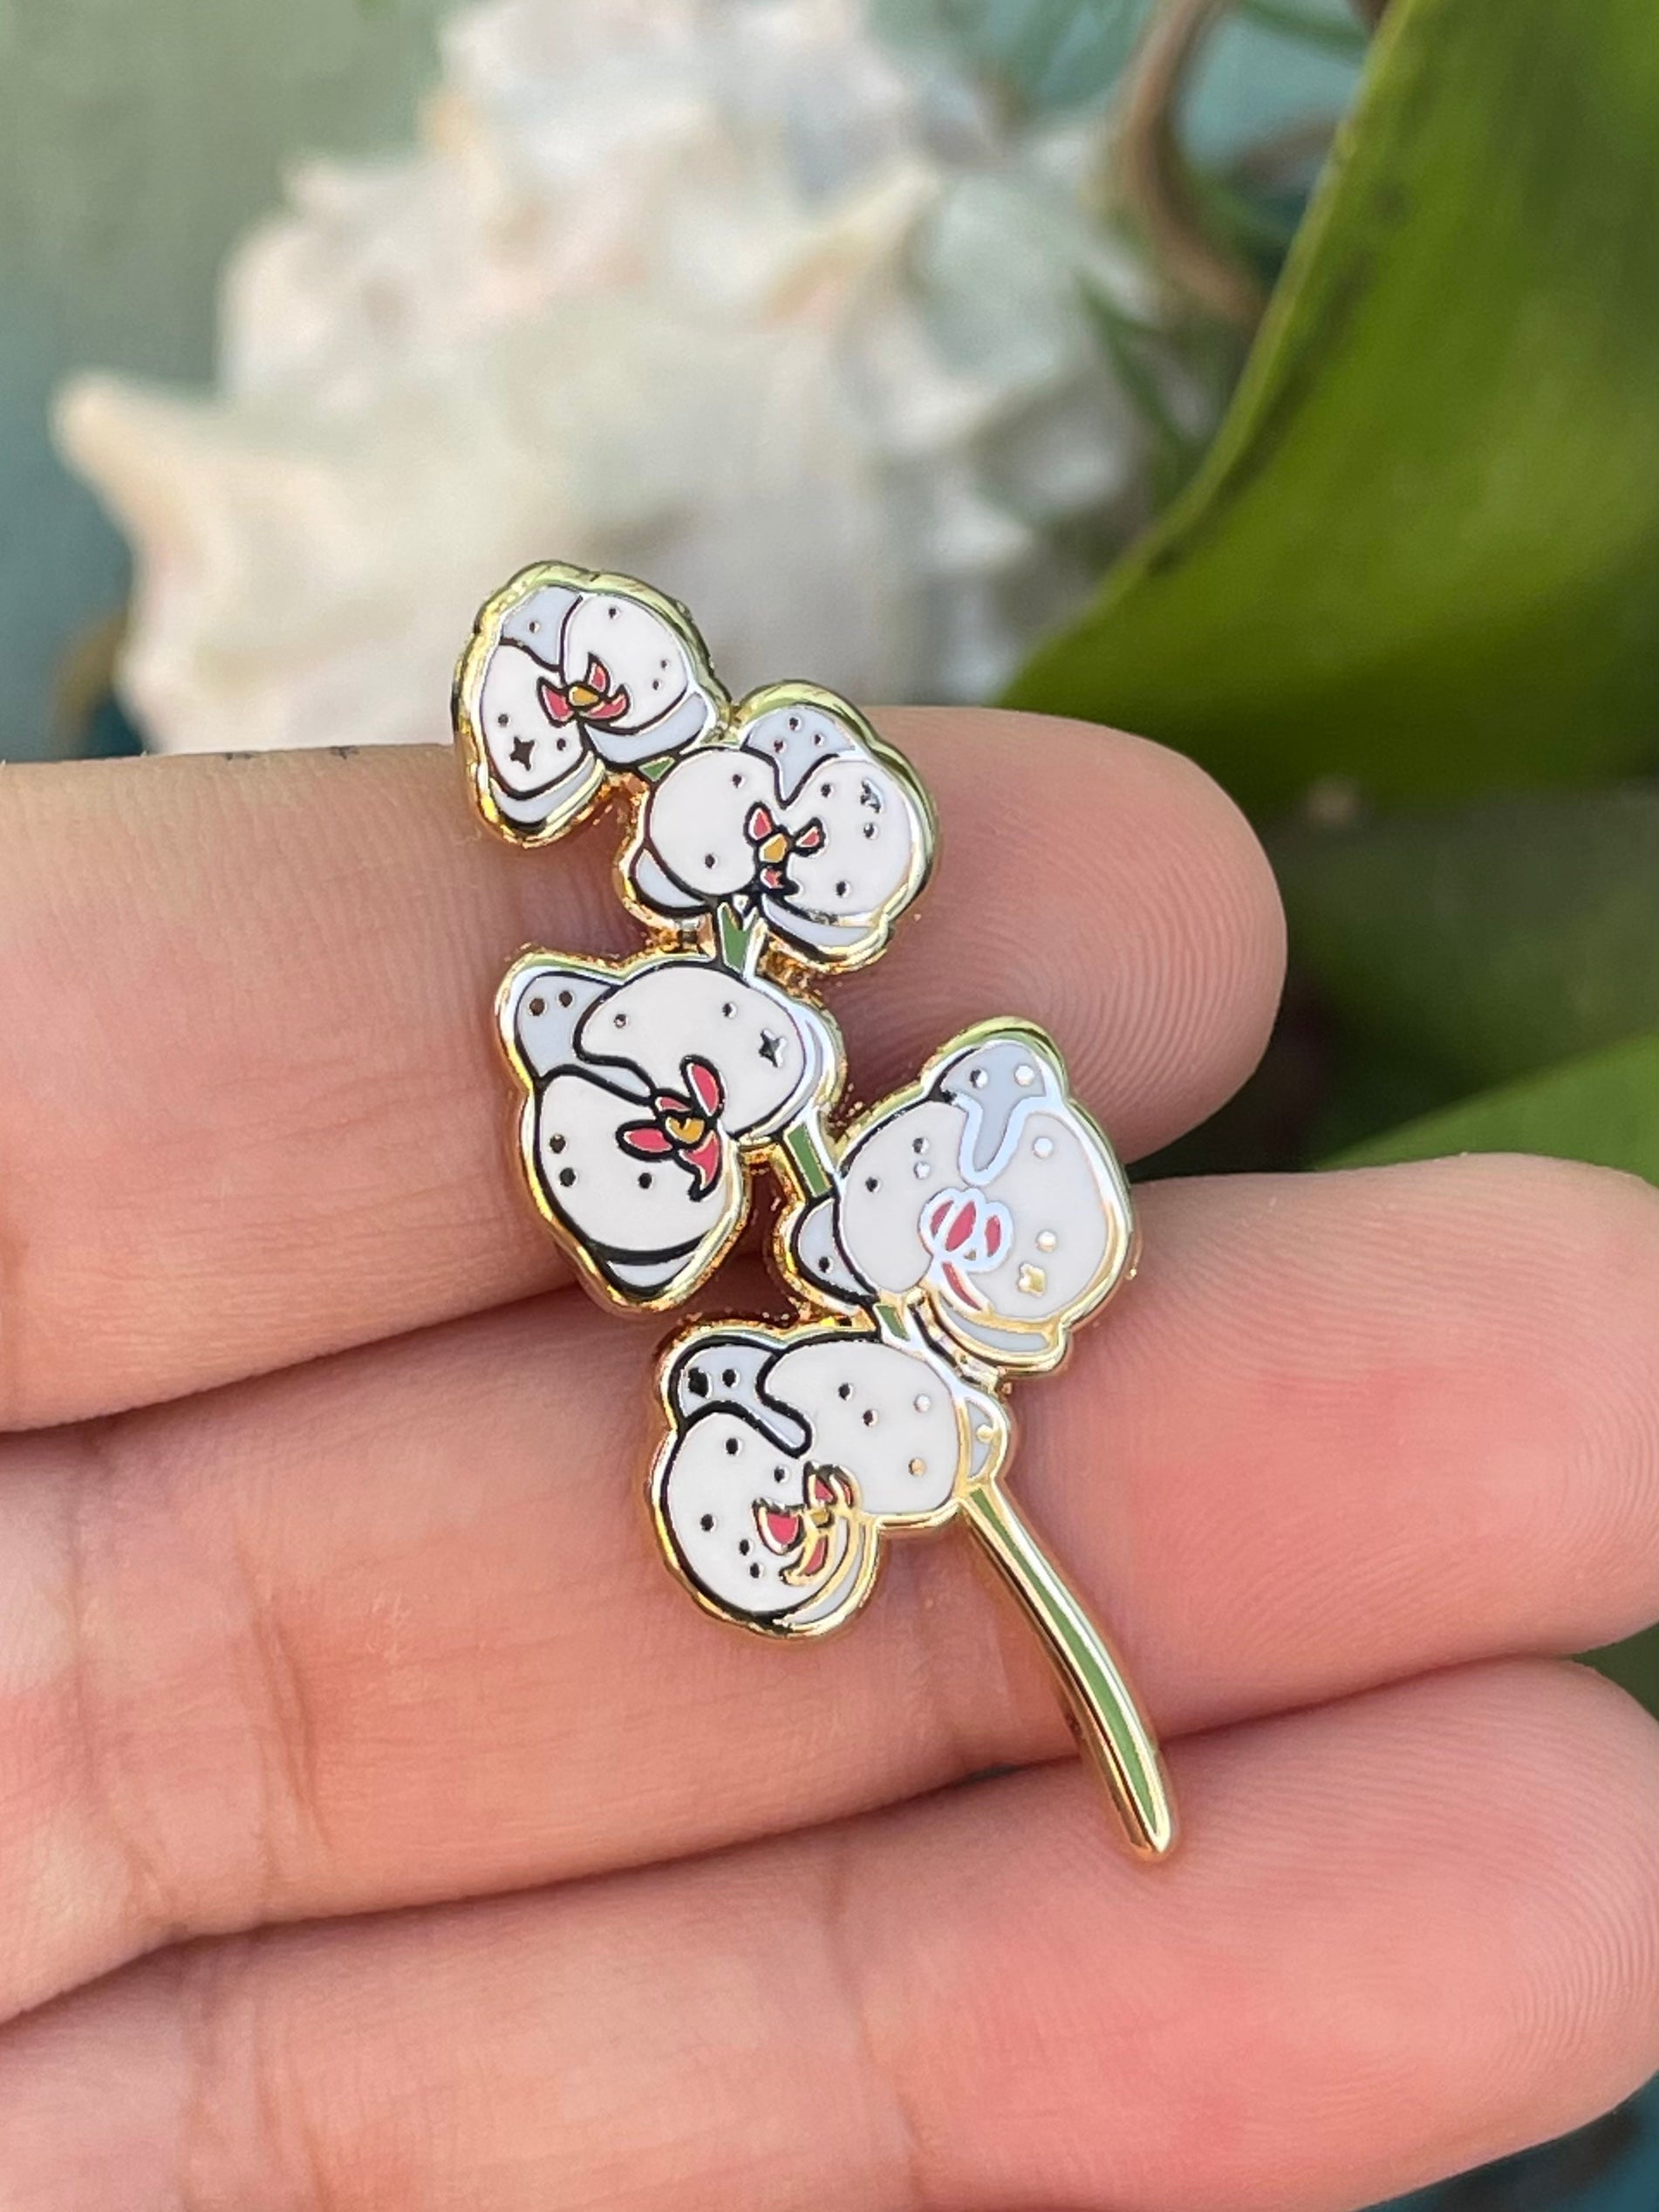 SECONDS ✷ Phalaenopsis Orchid Pin